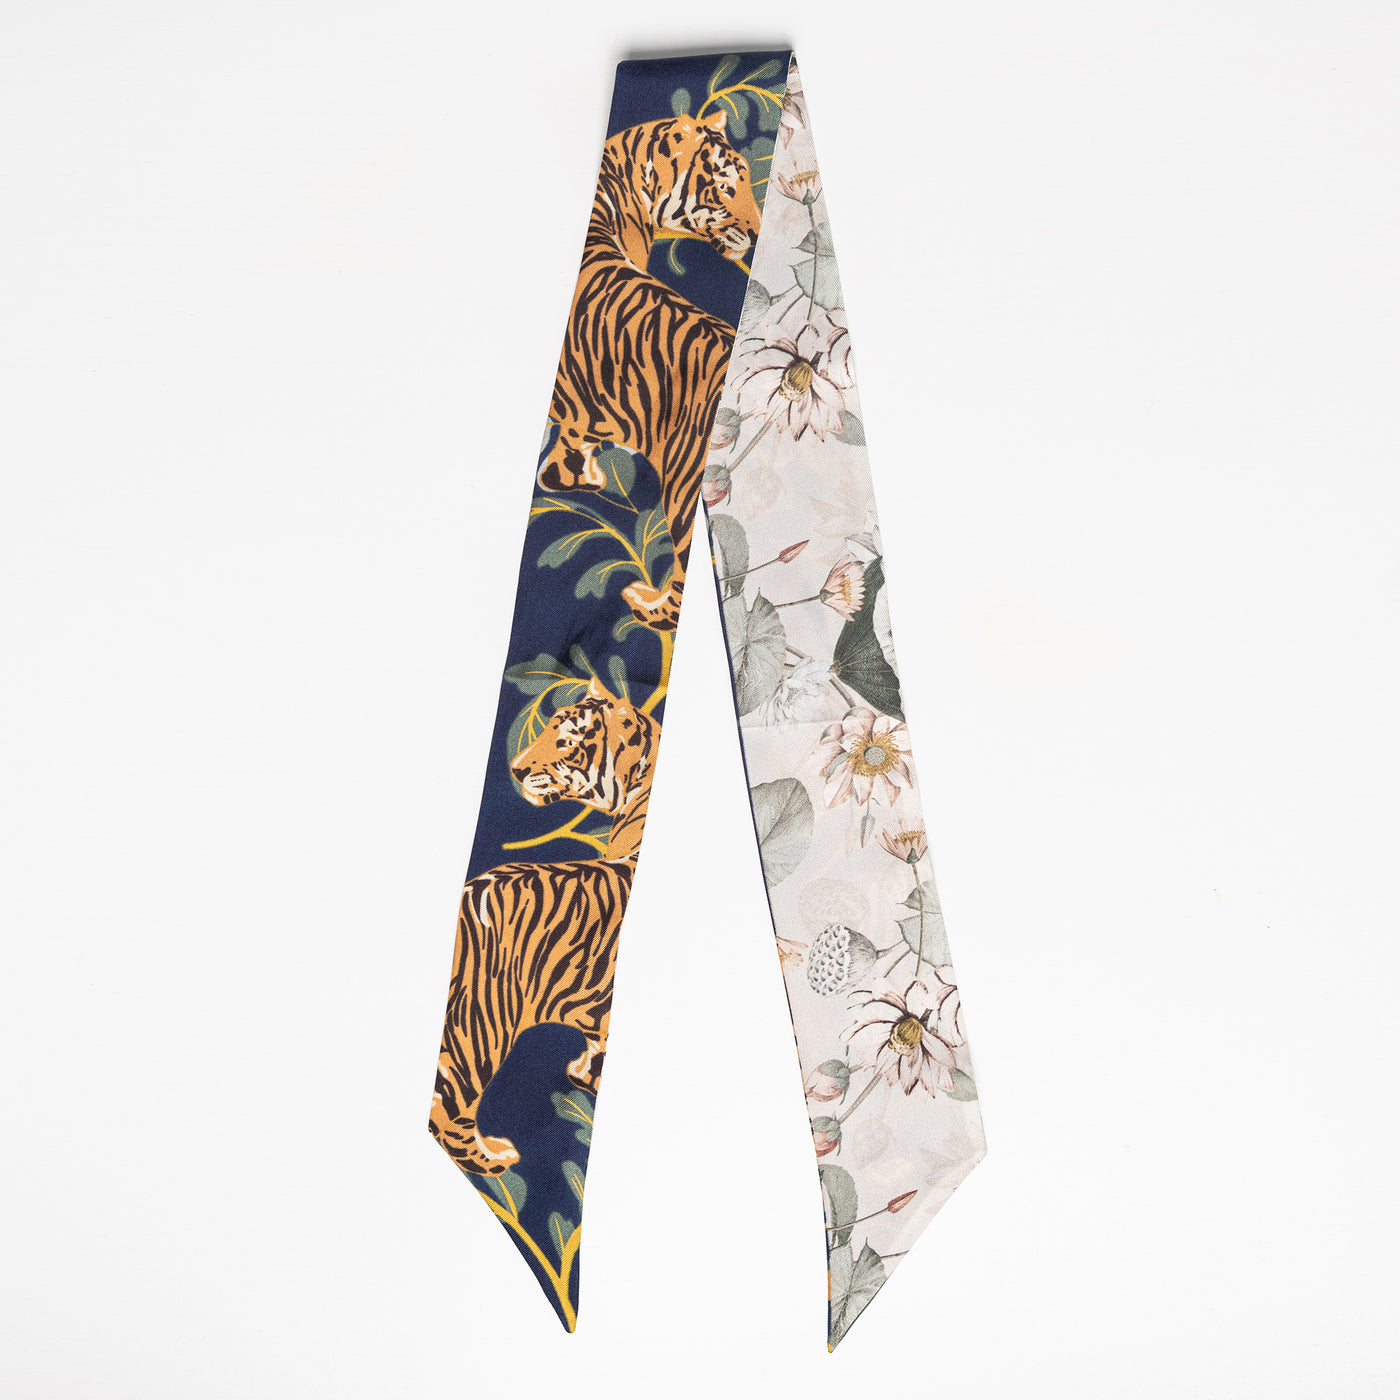 Lark and Ives / Silk Scarf / Twilly Scarf / Thin Scarf / Purse Accessories / Hair Accessories / Tiger and Lotus Pattern